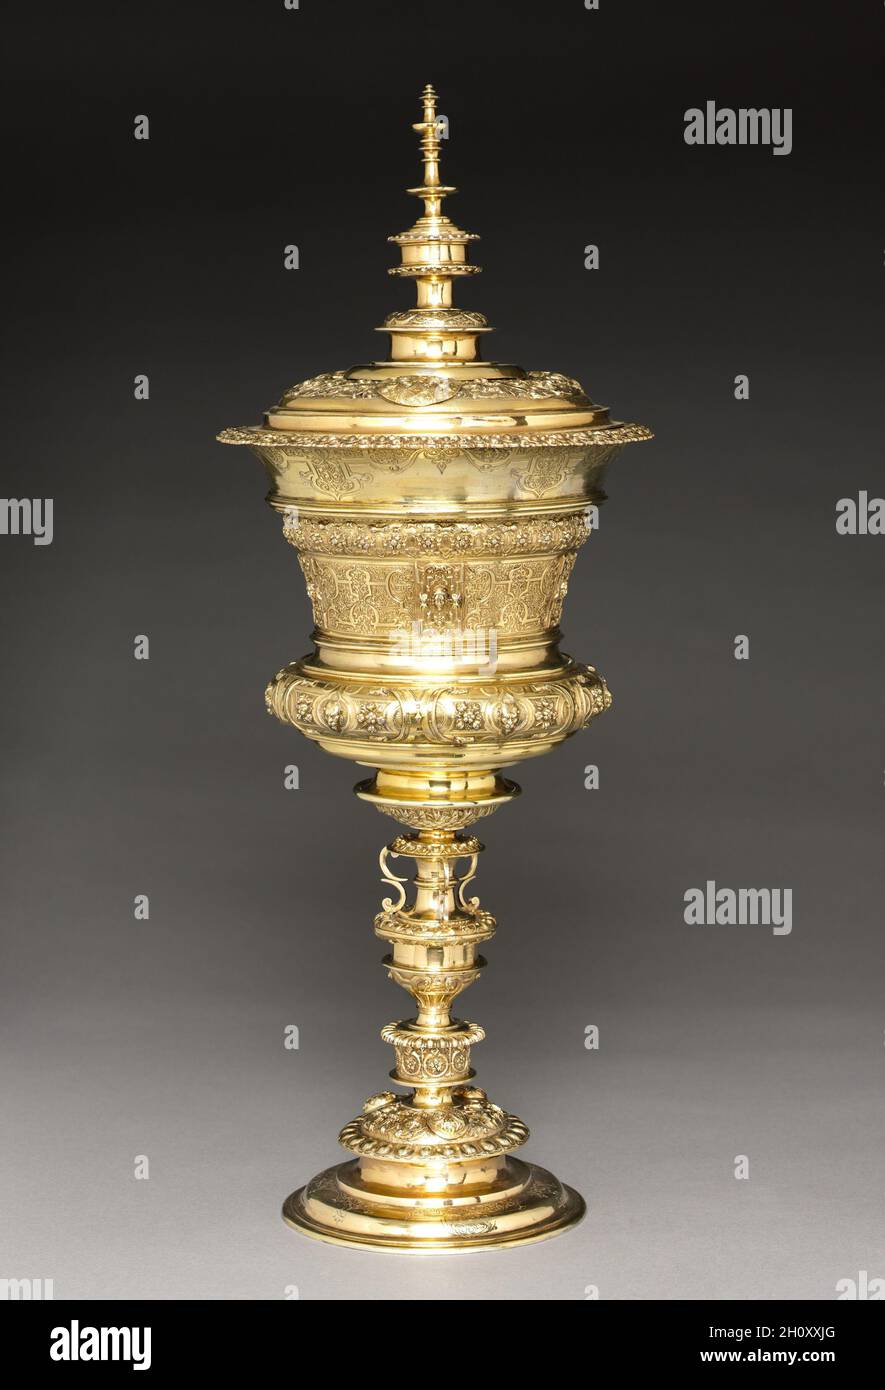 Standing Cup, mid-late 1500s. After a design by Virgilius Solis (German, 1514-1562). Gilt silver; overall: 50.8 x 20.4 cm (20 x 8 1/16 in.).  Large ceremonial silver cups with covers were a status symbol in the late 16th century, particularly when gilded like this superb example from Nuremberg. Stylish and grand, these cups provided the ultimate vessel from which a royal guest or aristocratic visitor could drink at a formal banquet. They came to be known as willkom, or welcome cups, as a result. The lid, mid-section, and base are all cast in sections, creating imposing height and stability for Stock Photo